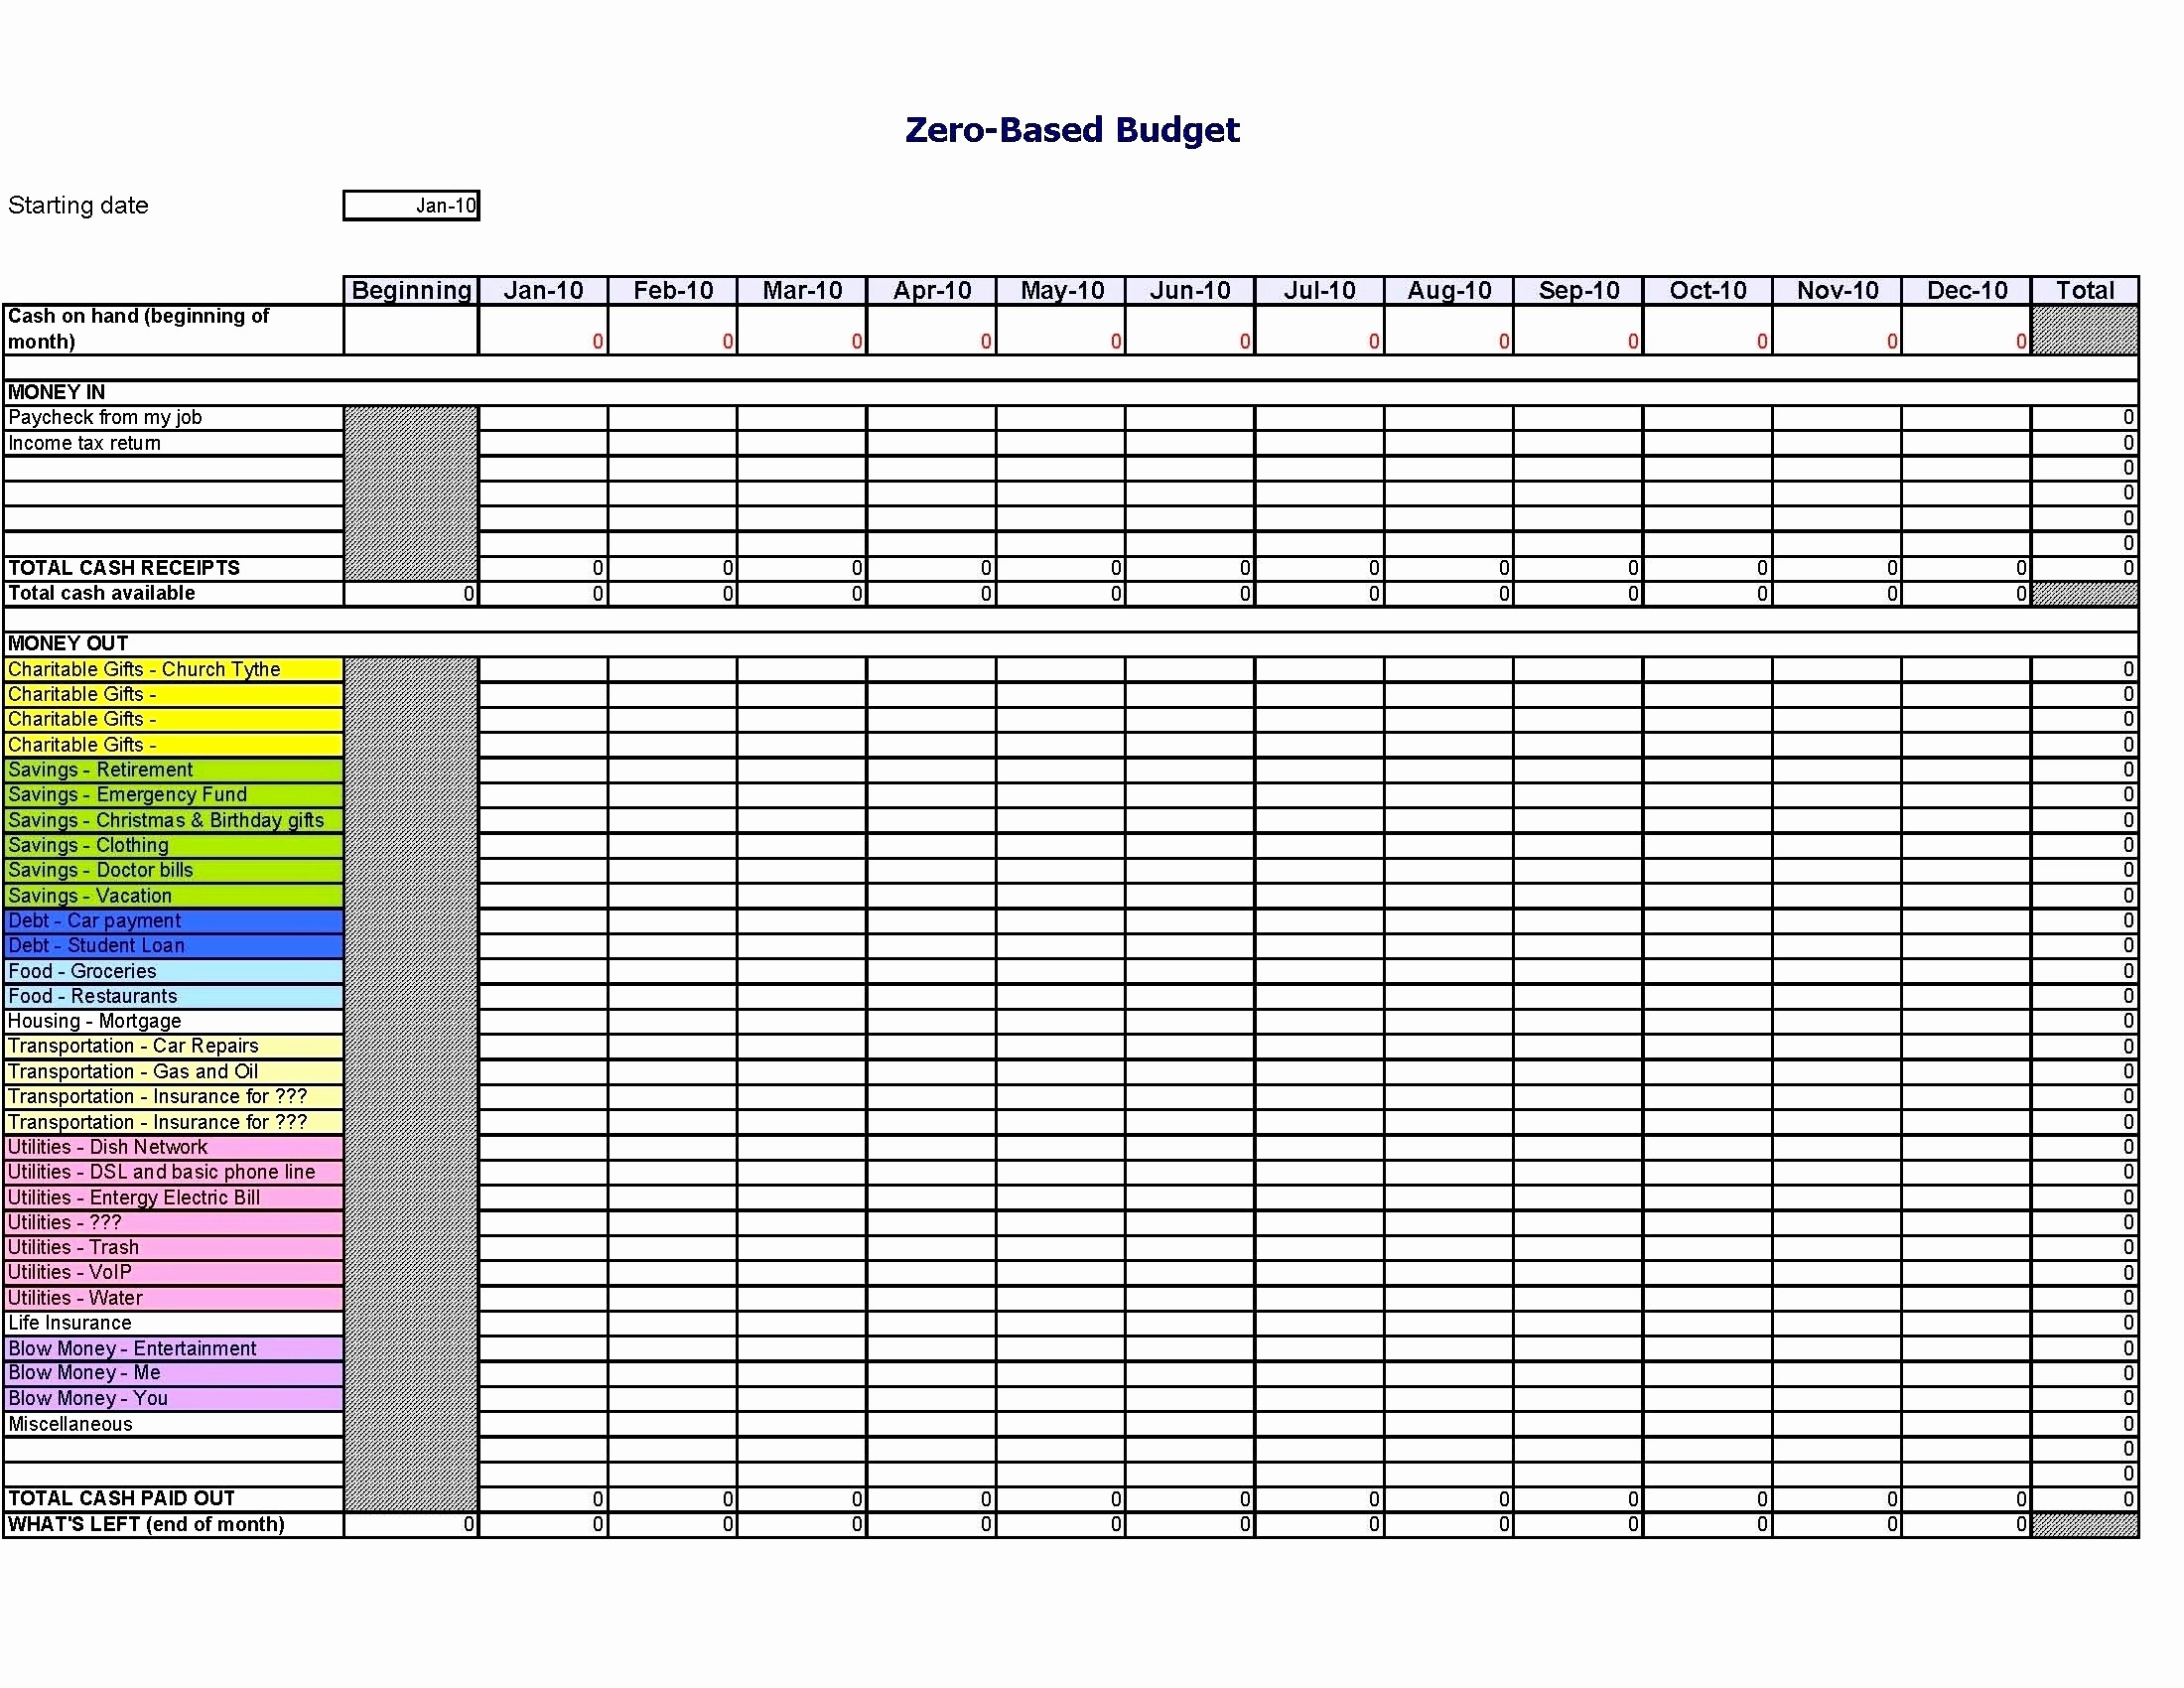 College Application Spreadsheet Intended For College Application Spreadsheet Checklist  Austinroofing